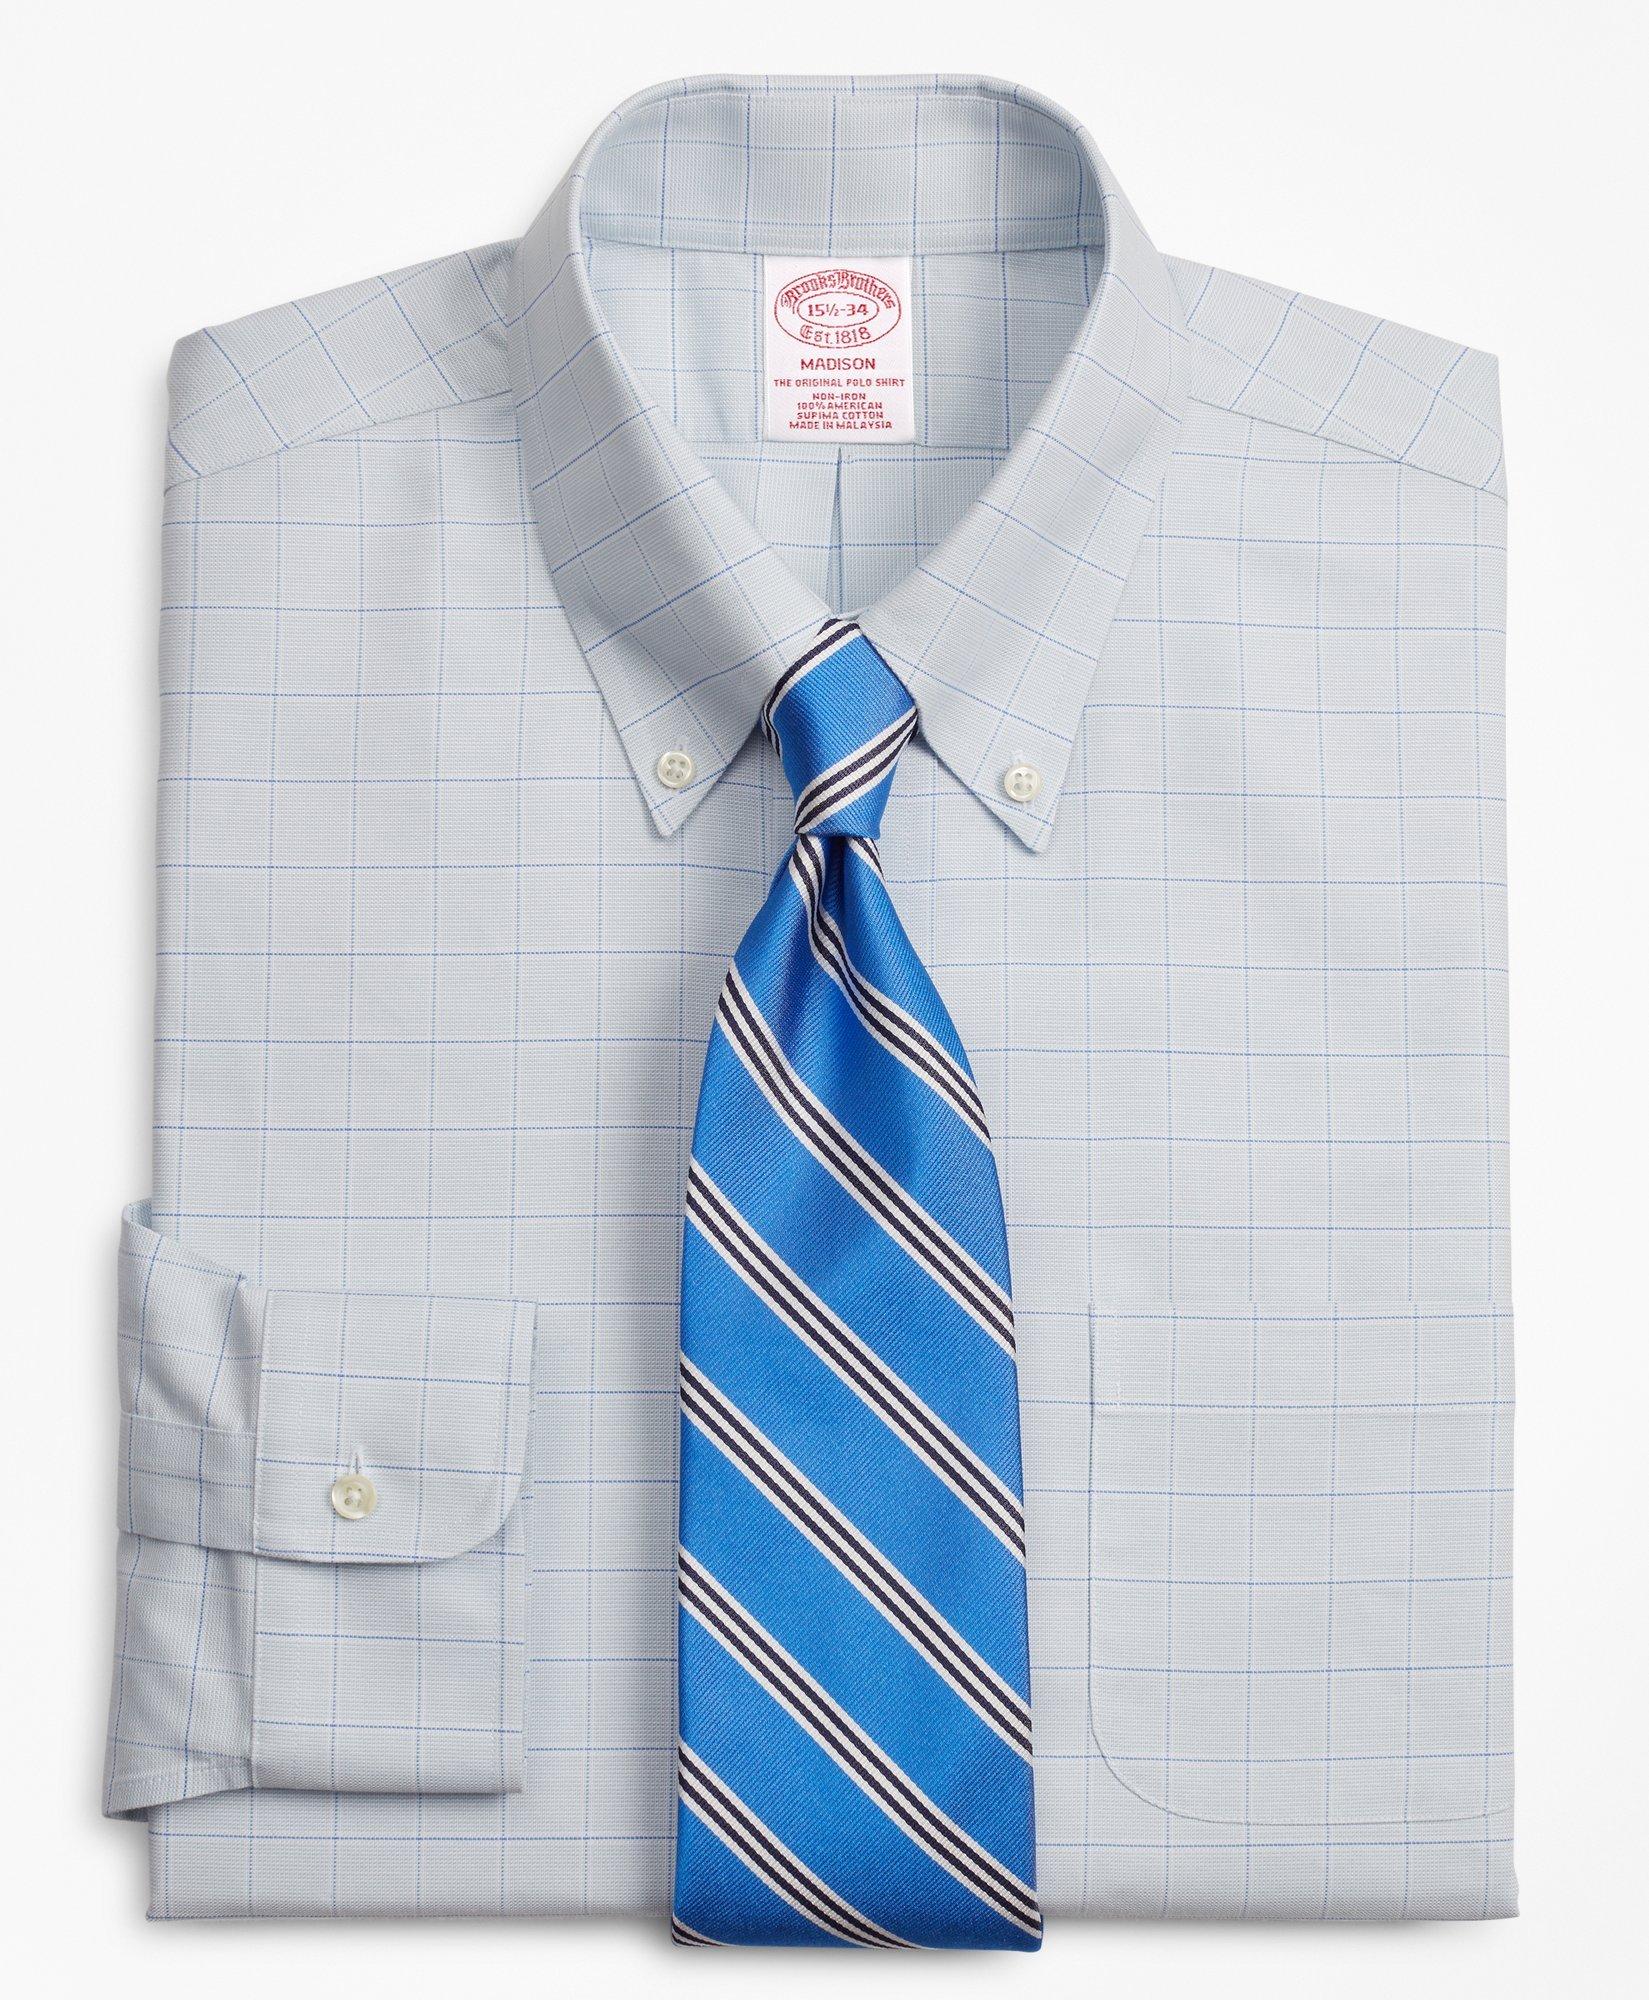 Brooks Brothers Cool Madison Relaxed-Fit Dress Shirt, Non-Iron Windowpane